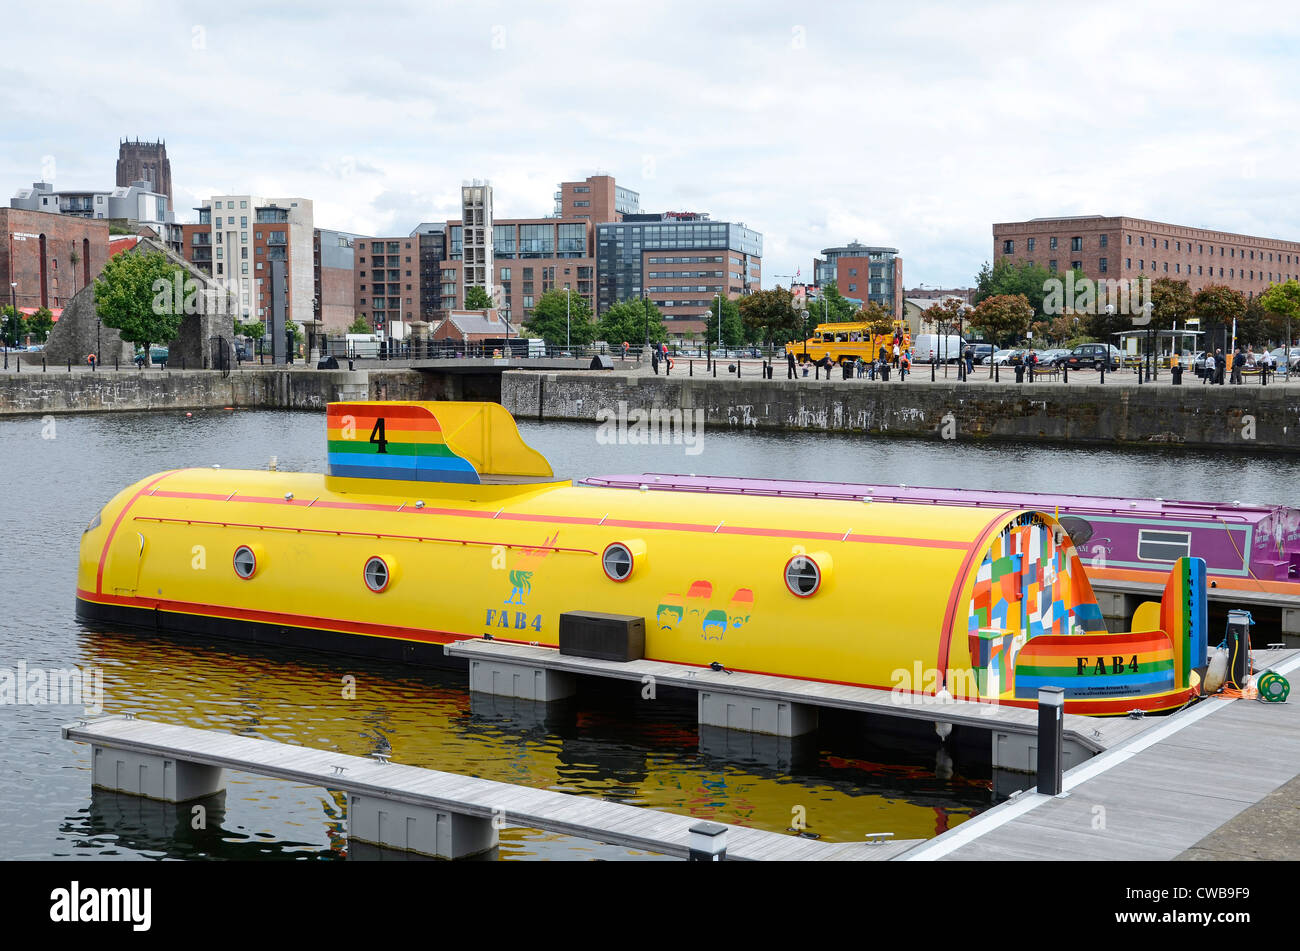 A barge converted into a holiday apartment at the Albert Dock in Liverpool, England, UK Stock Photo